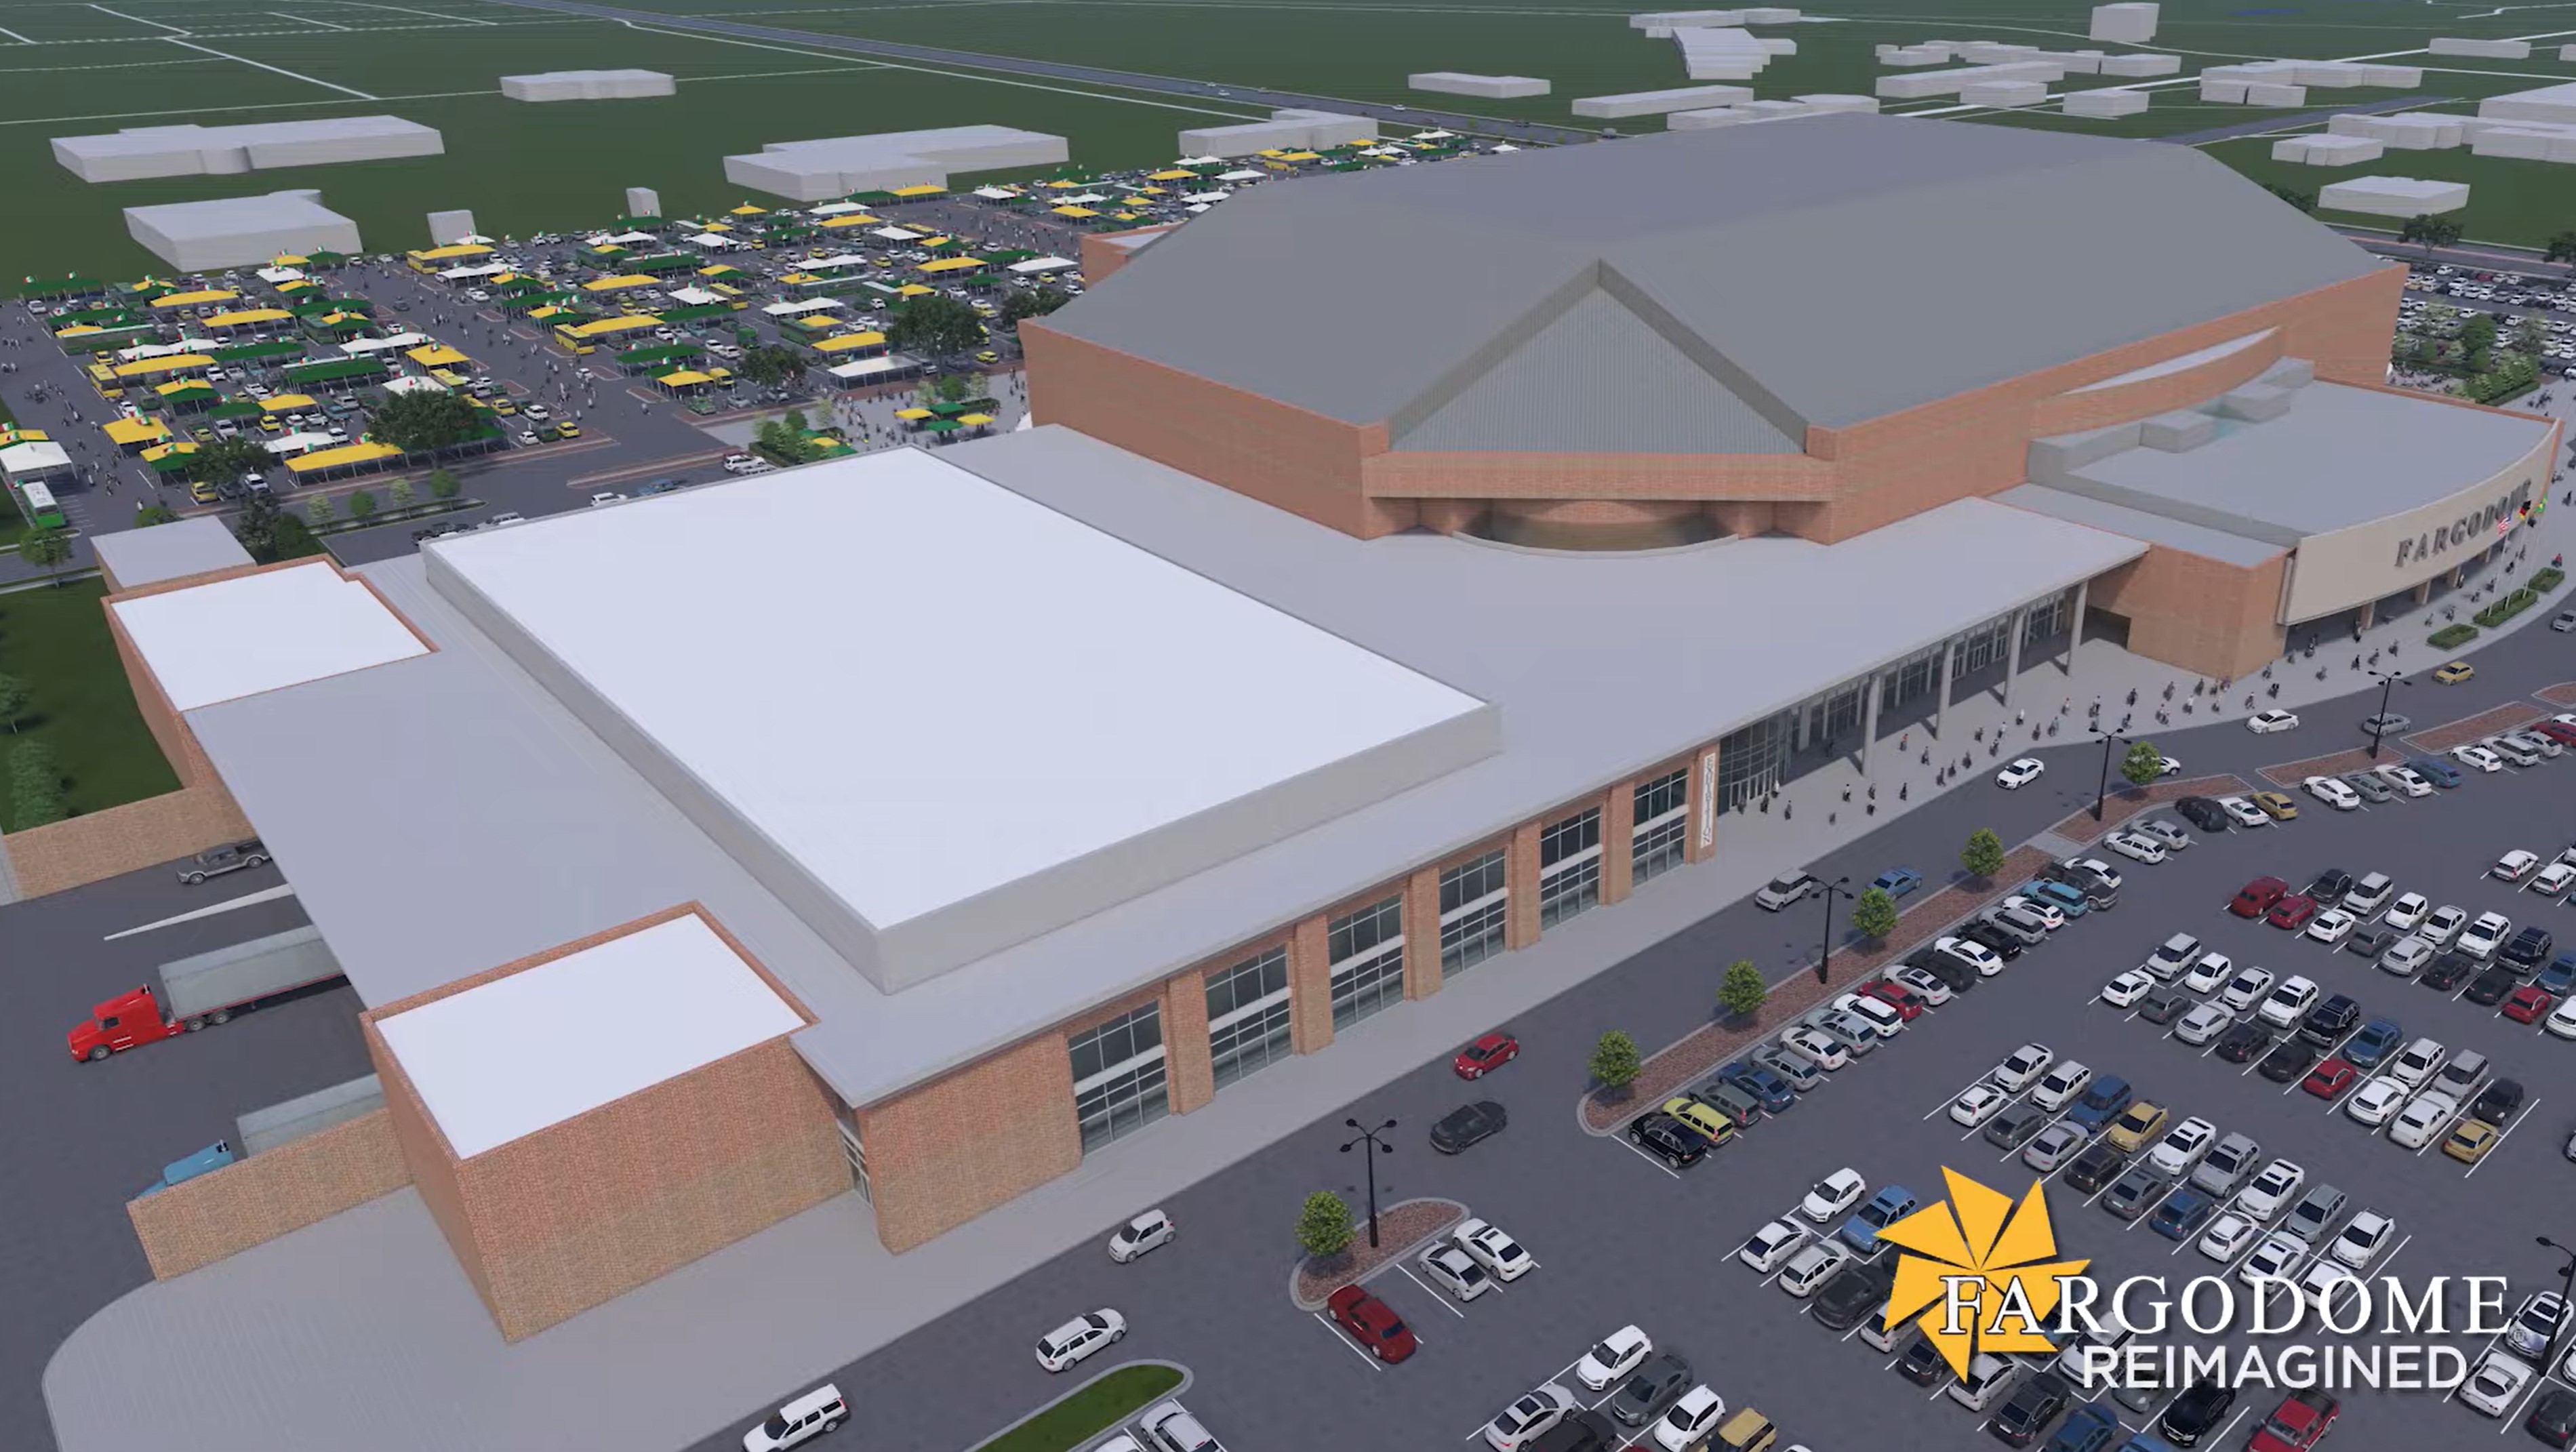 Image for FMWF Chamber to discuss FARGODOME expansion at October 3 Eggs & Issues event